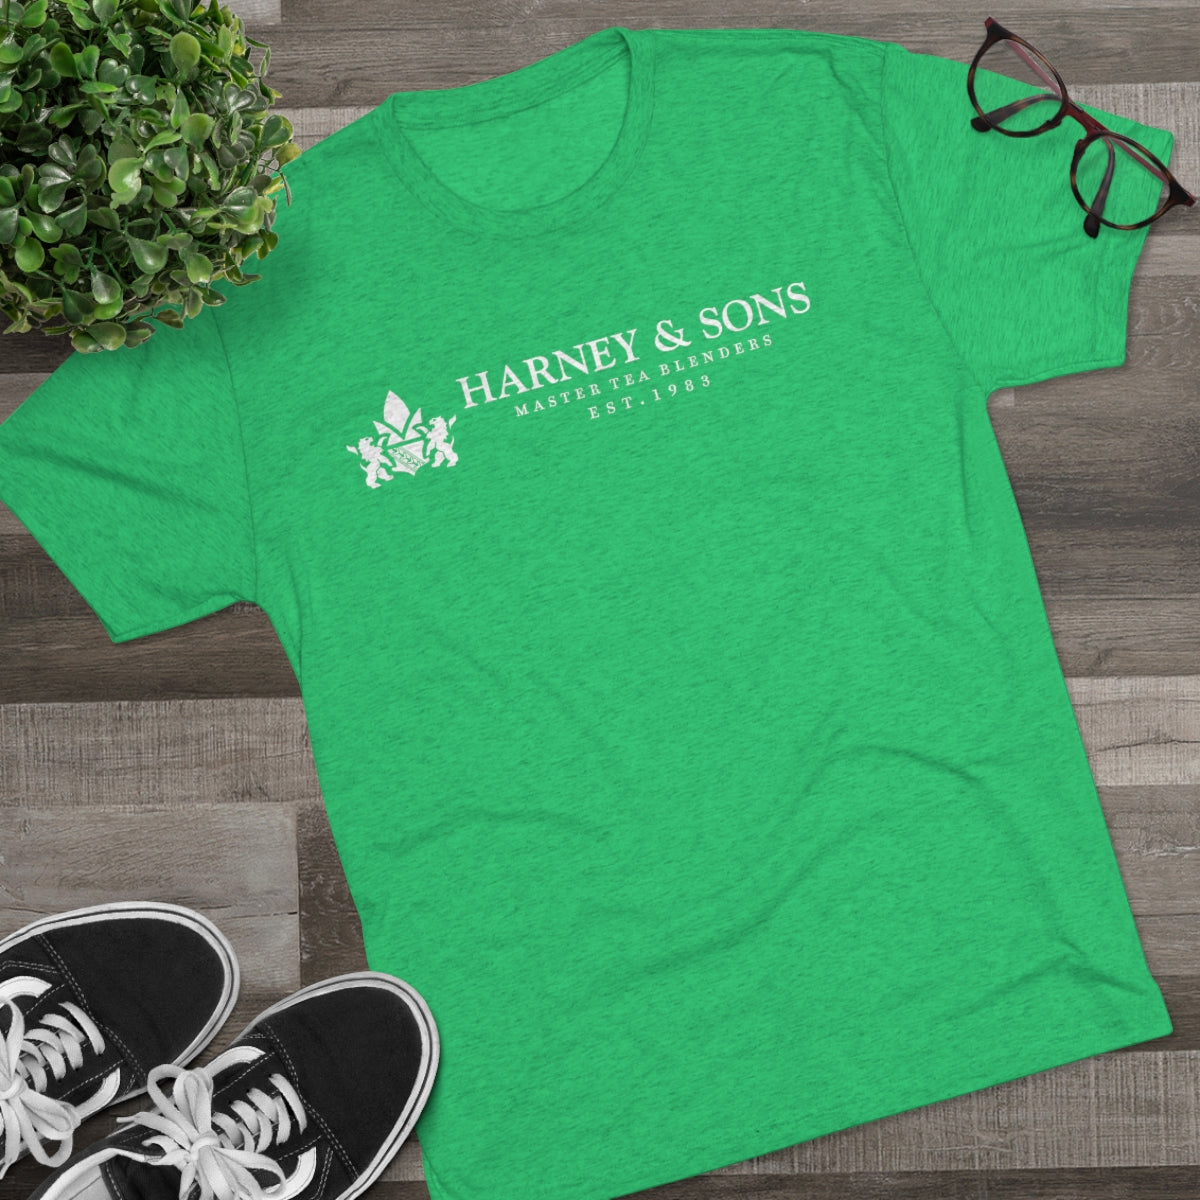 Harney & Sons - Est. 1983 Graphic Tee -   - Harney & Sons Fine Teas